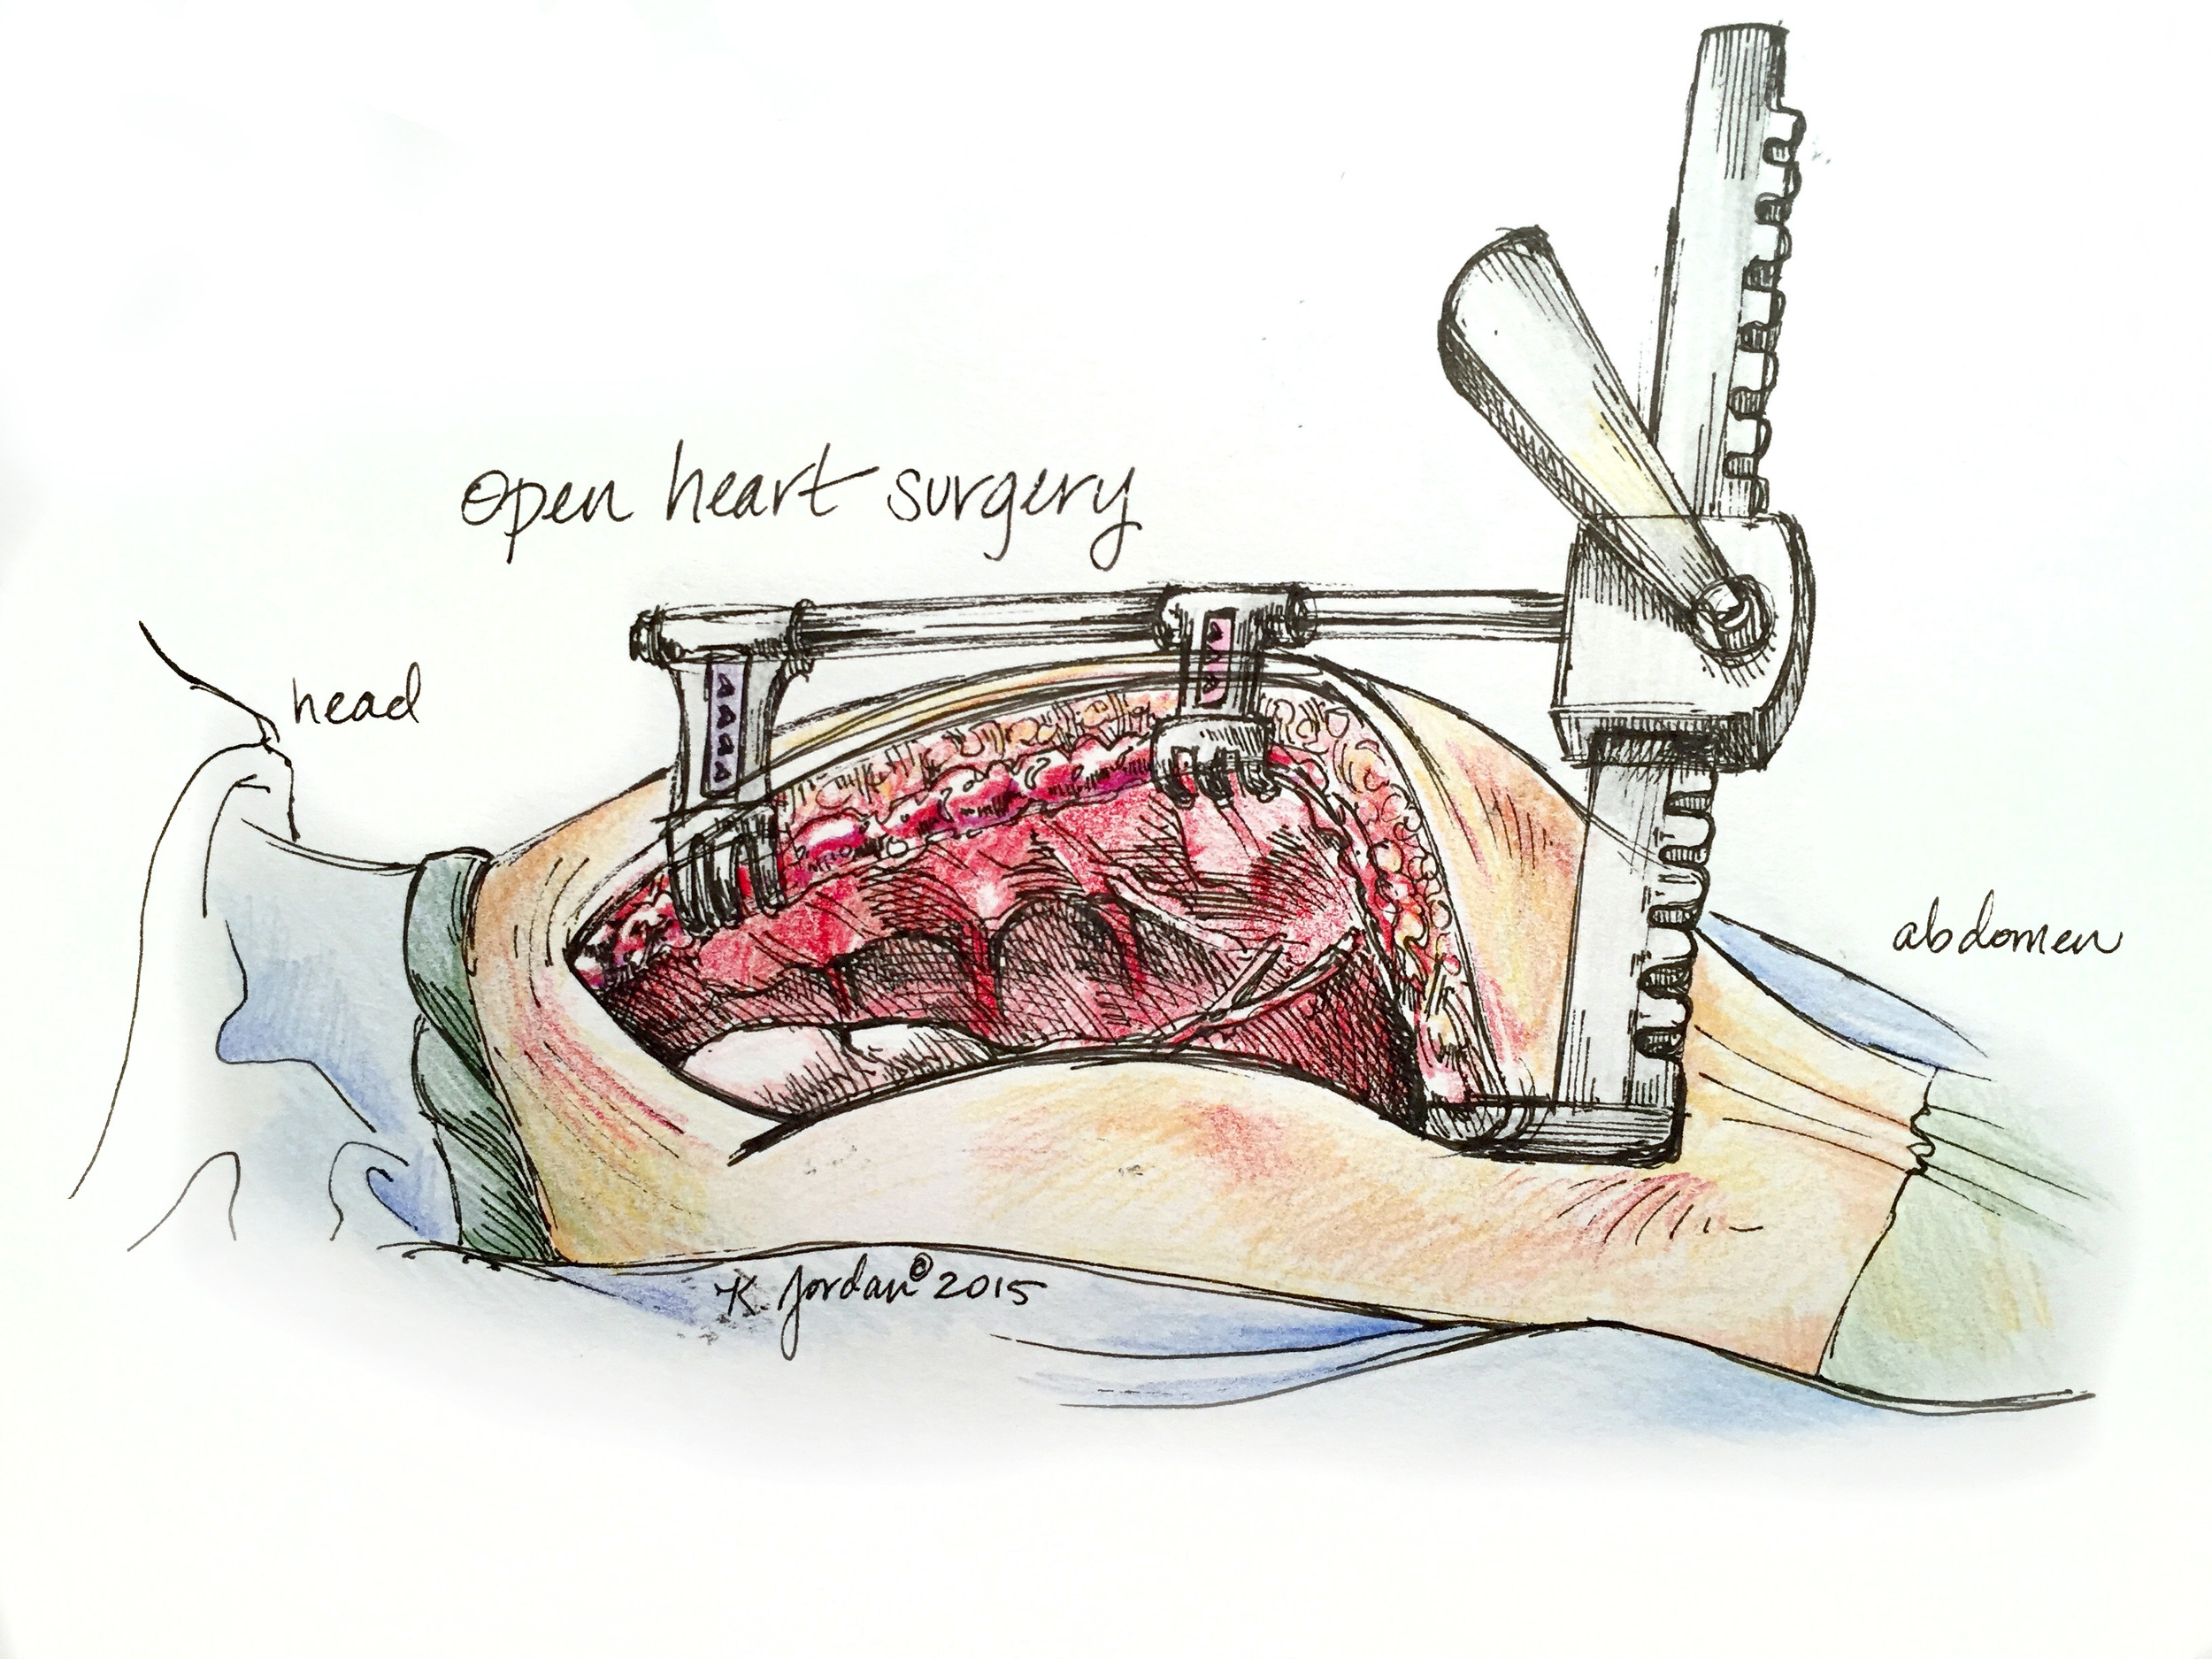 Surgical Sketch: Open Heart